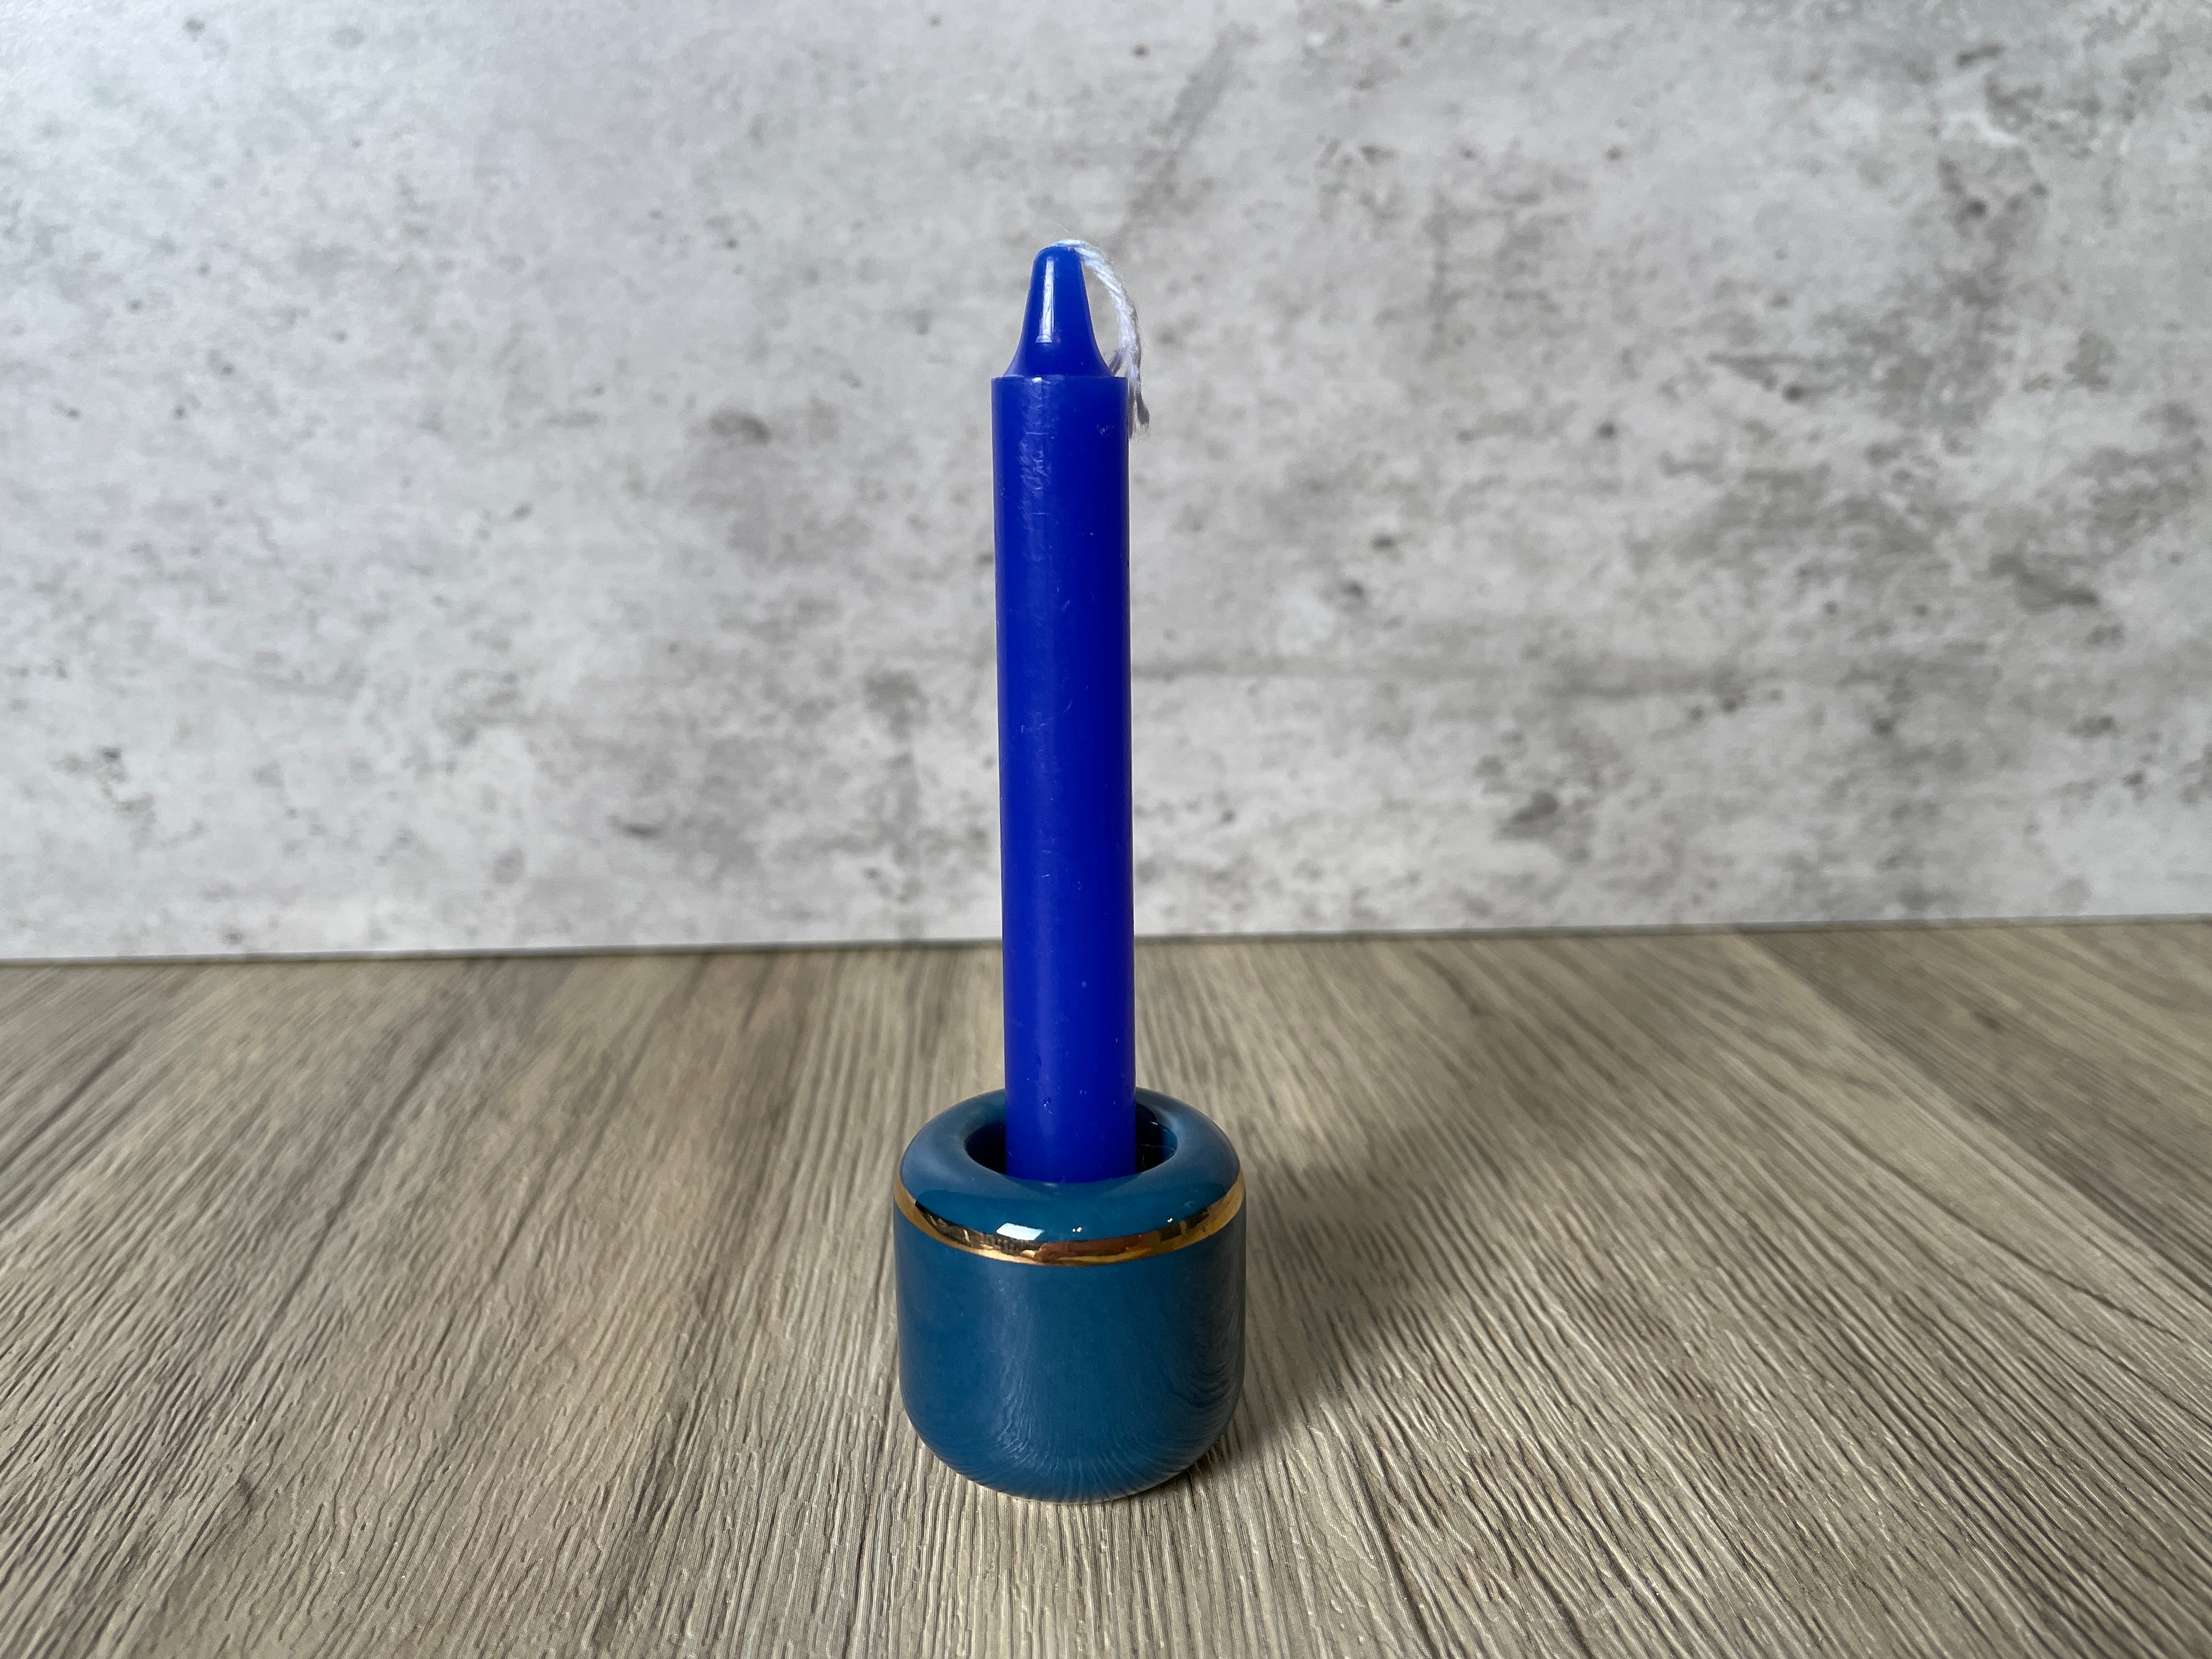 Buy Online Latest and Unique Blue Chime Candle Holder - Ceramic with Gold Band | Shop Best Spiritual Items - The Mystical Ritual